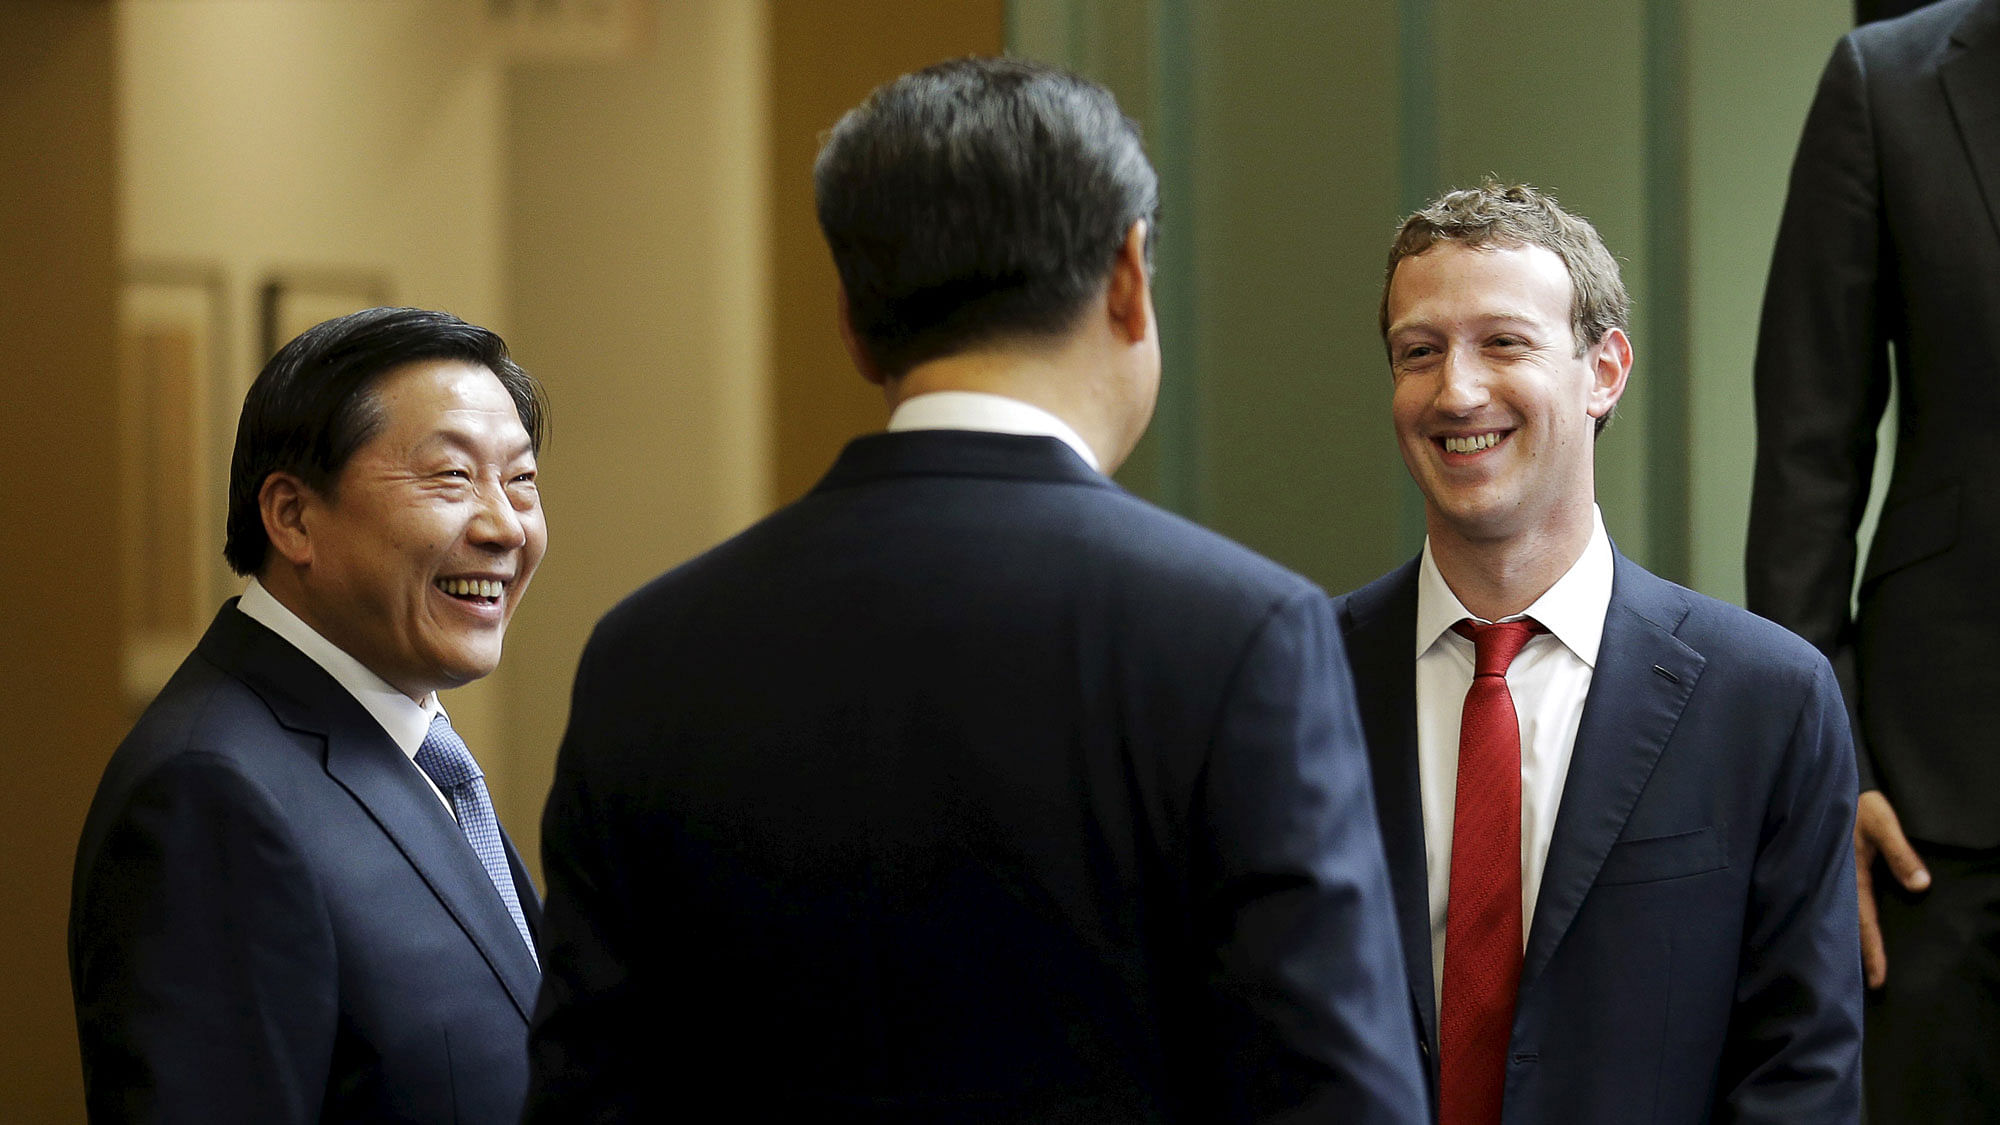 Chinese President Xi Jinping (centre) talks with Facebook Chief Executive Mark Zuckerberg (right) as China’s top Internet regulator Lu Wei (left) looks on, during a gathering of CEOs and other executives at Microsoft’s main campus in Redmond, Washington. (Photo: Reuters)